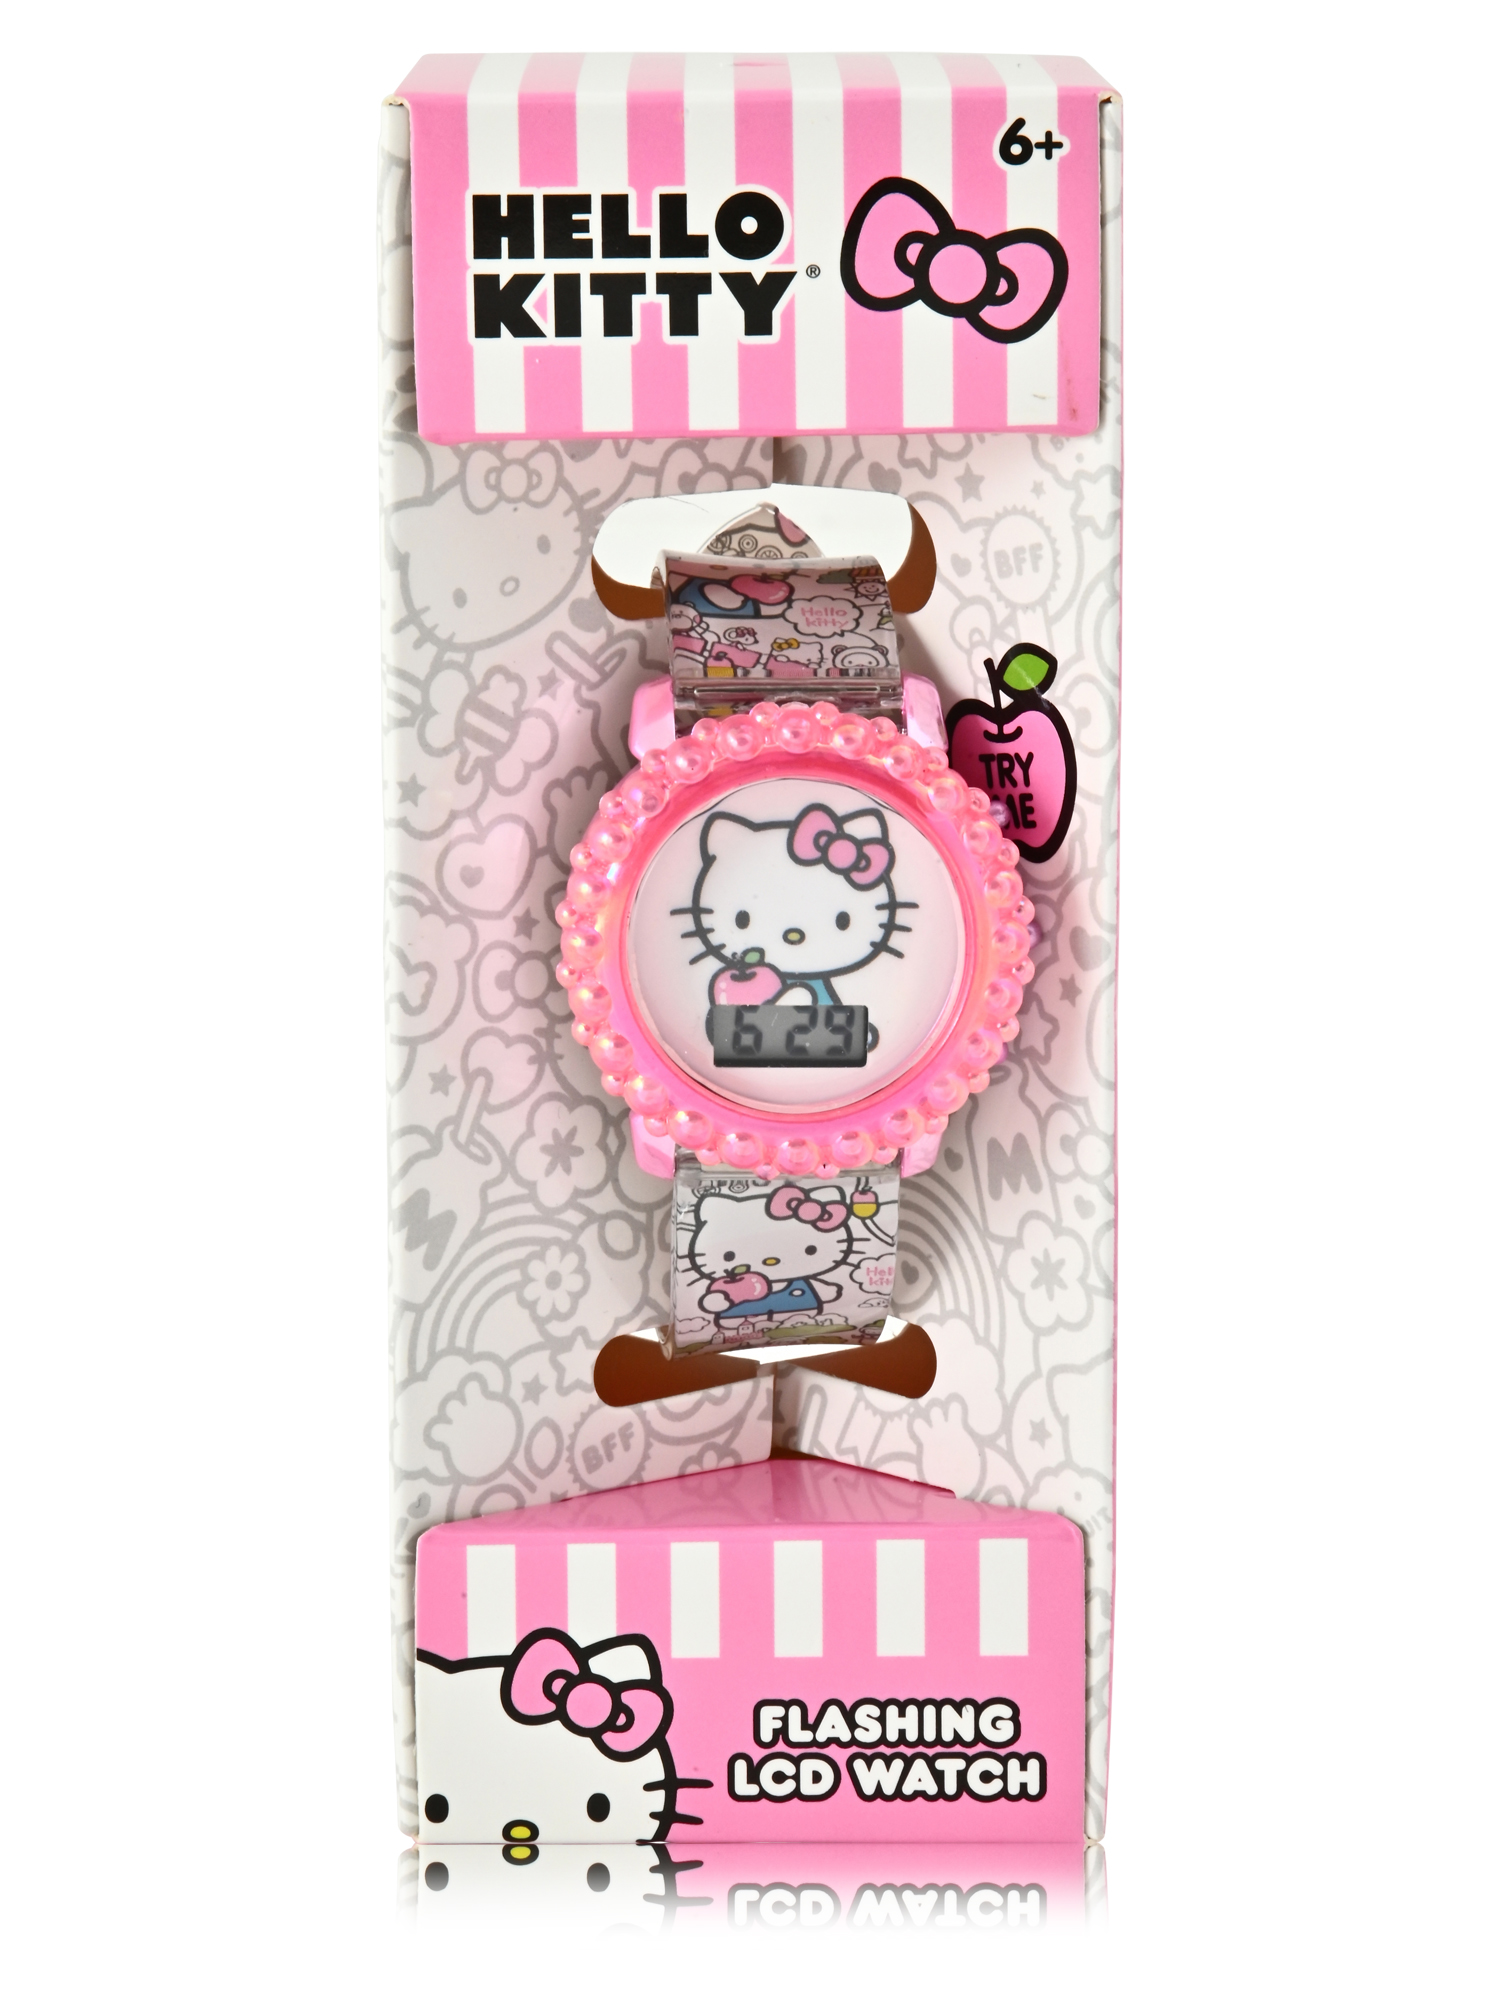 HK4166WM Hello Kitty Kids Molded Case Flashing Lights LCD Watch with Printed Strap - image 1 of 3